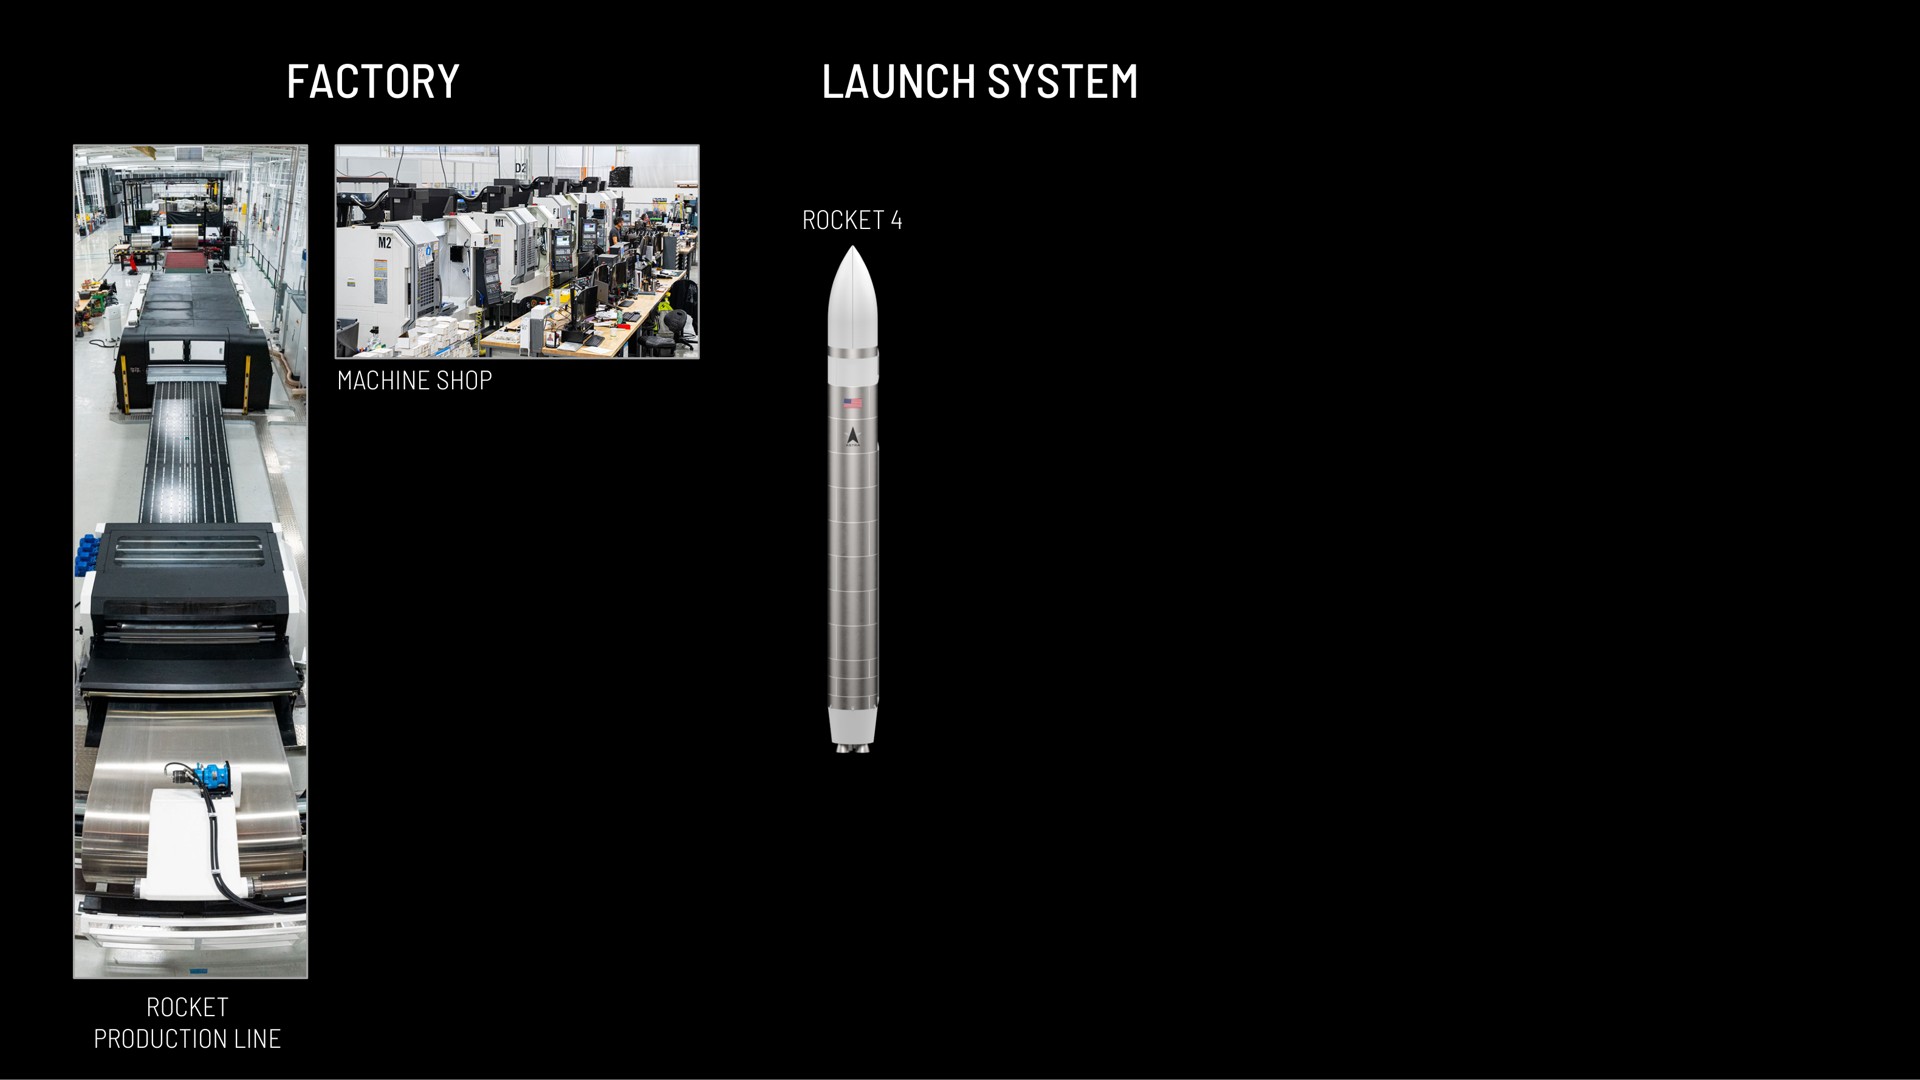 factory launch system | Astra